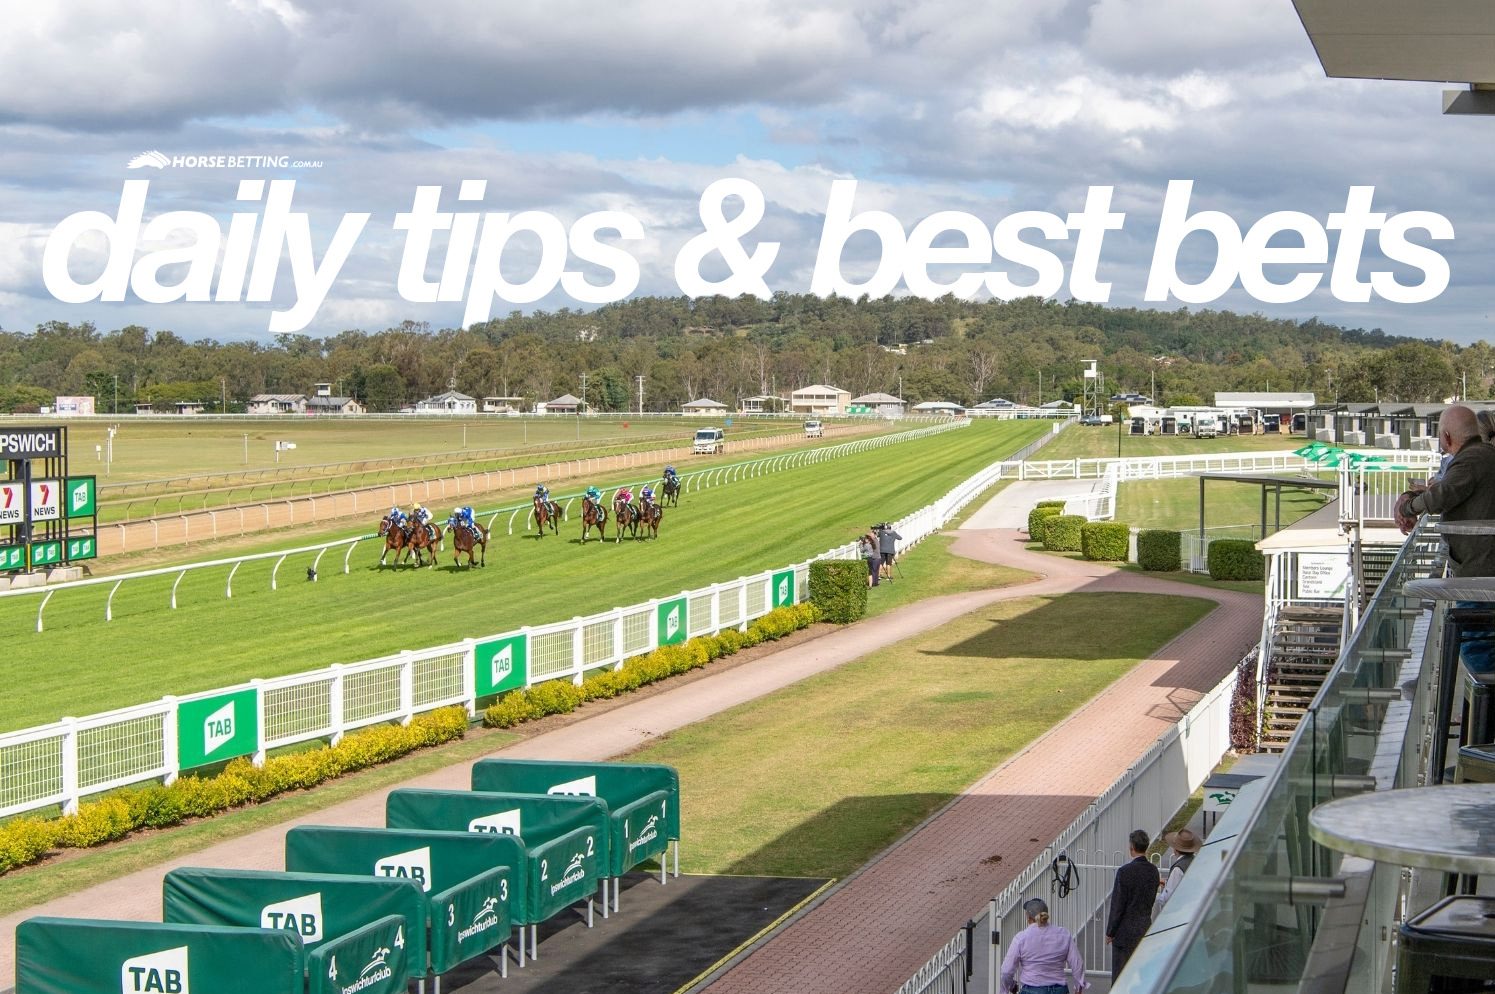 Friday horse racing tips & best bets